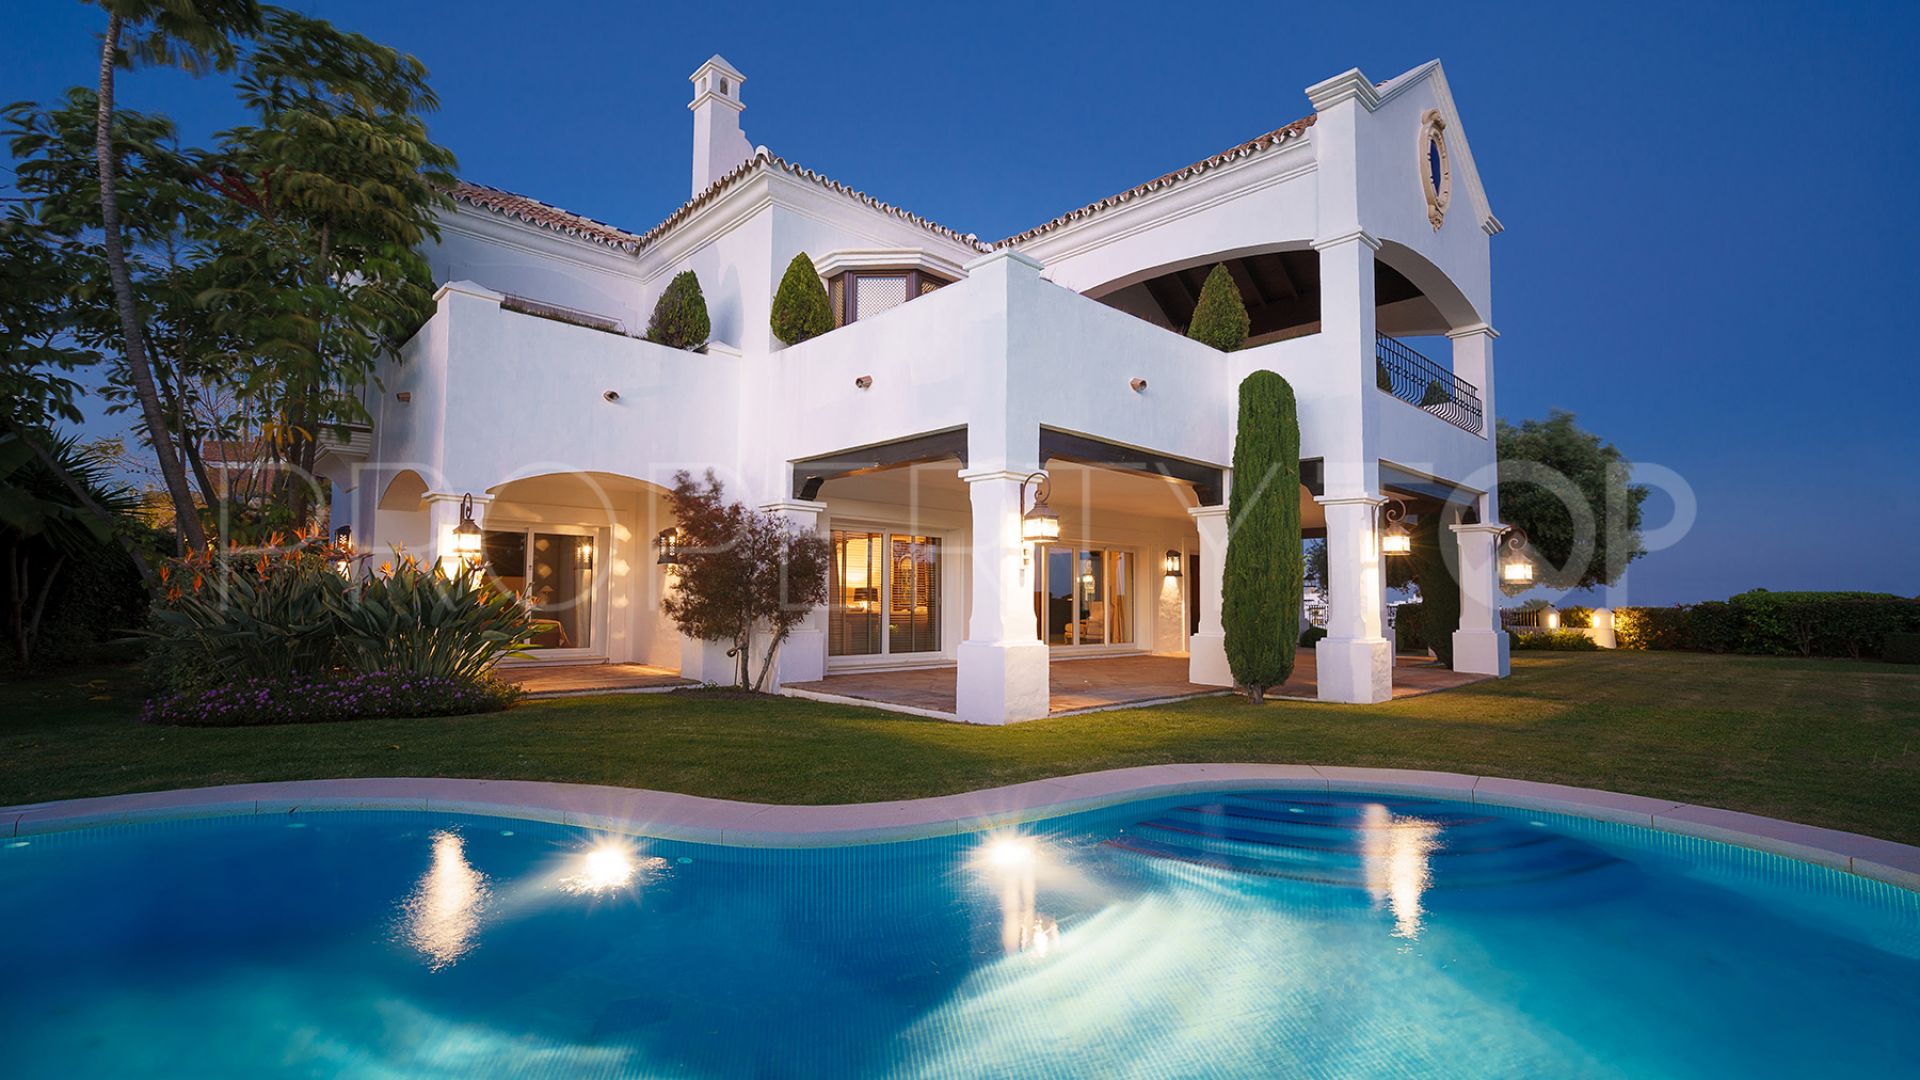 Villa with 5 bedrooms for sale in Capanes Sur